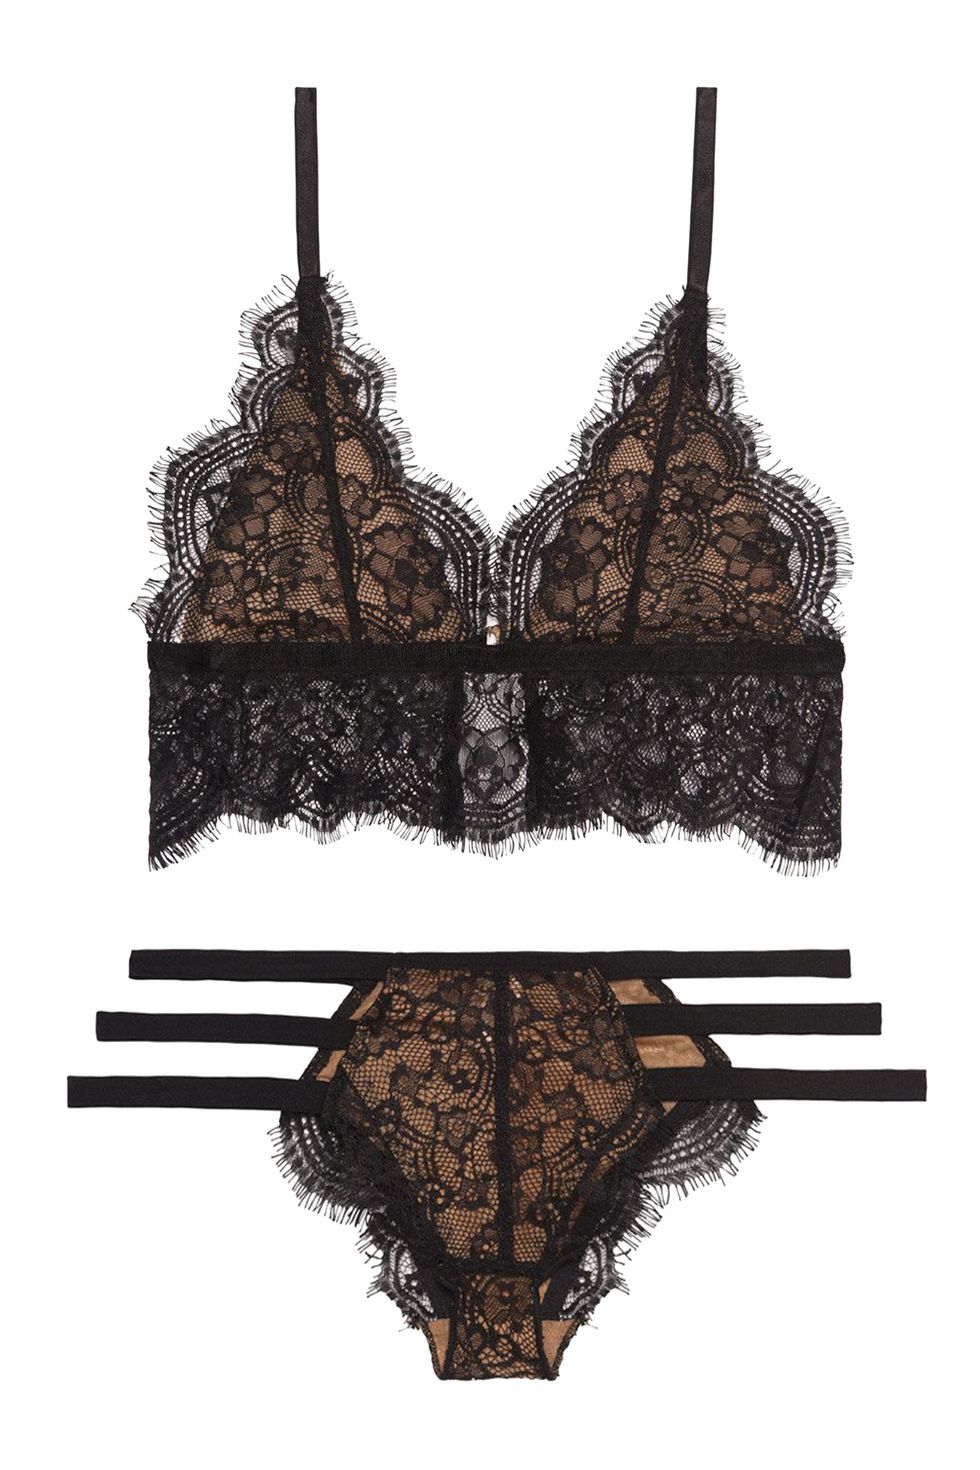 Valentine's Day Gift for Wife, Lingerie, Sexy Lingerie, Bralet, Lace  Bralette, Black Lace Lingerie, Soft Cup, Vintage Inspired, Black Lace 